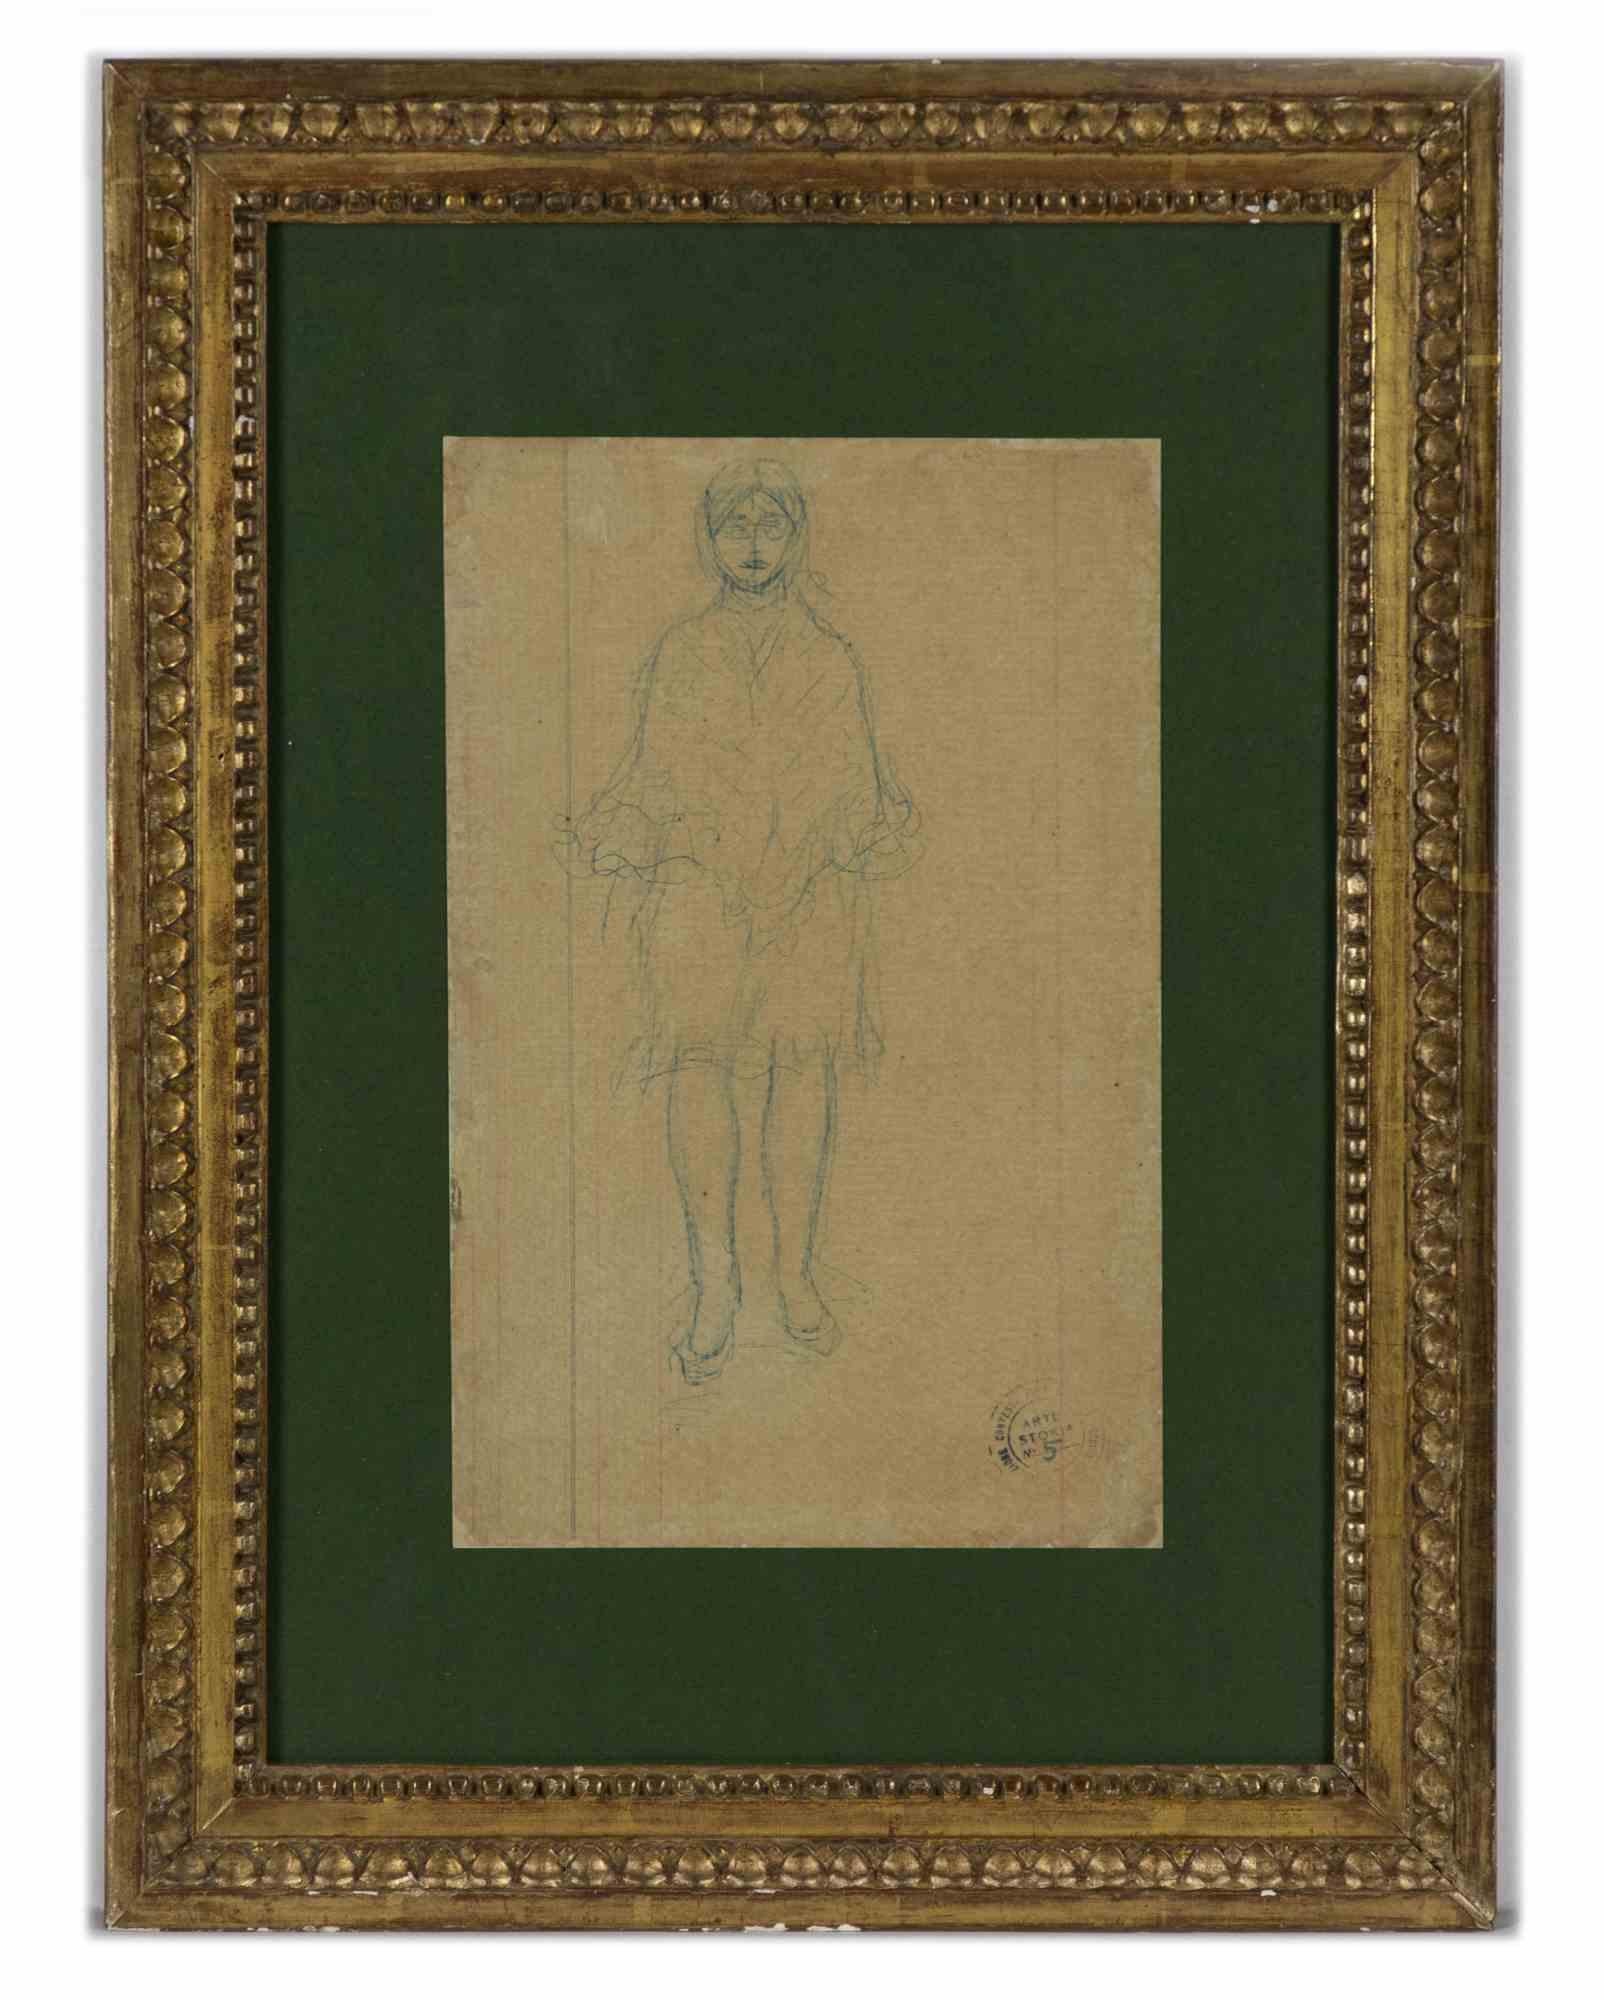 Female figure is an original modern artwork realized by Aristide Maillol in the early 20th Century.

Blue colored pastel on paper.

Provenance: Pecci Blunt collection (dry stamp on the lower right margin).

Includes frame.

Aristide Maillol, (born